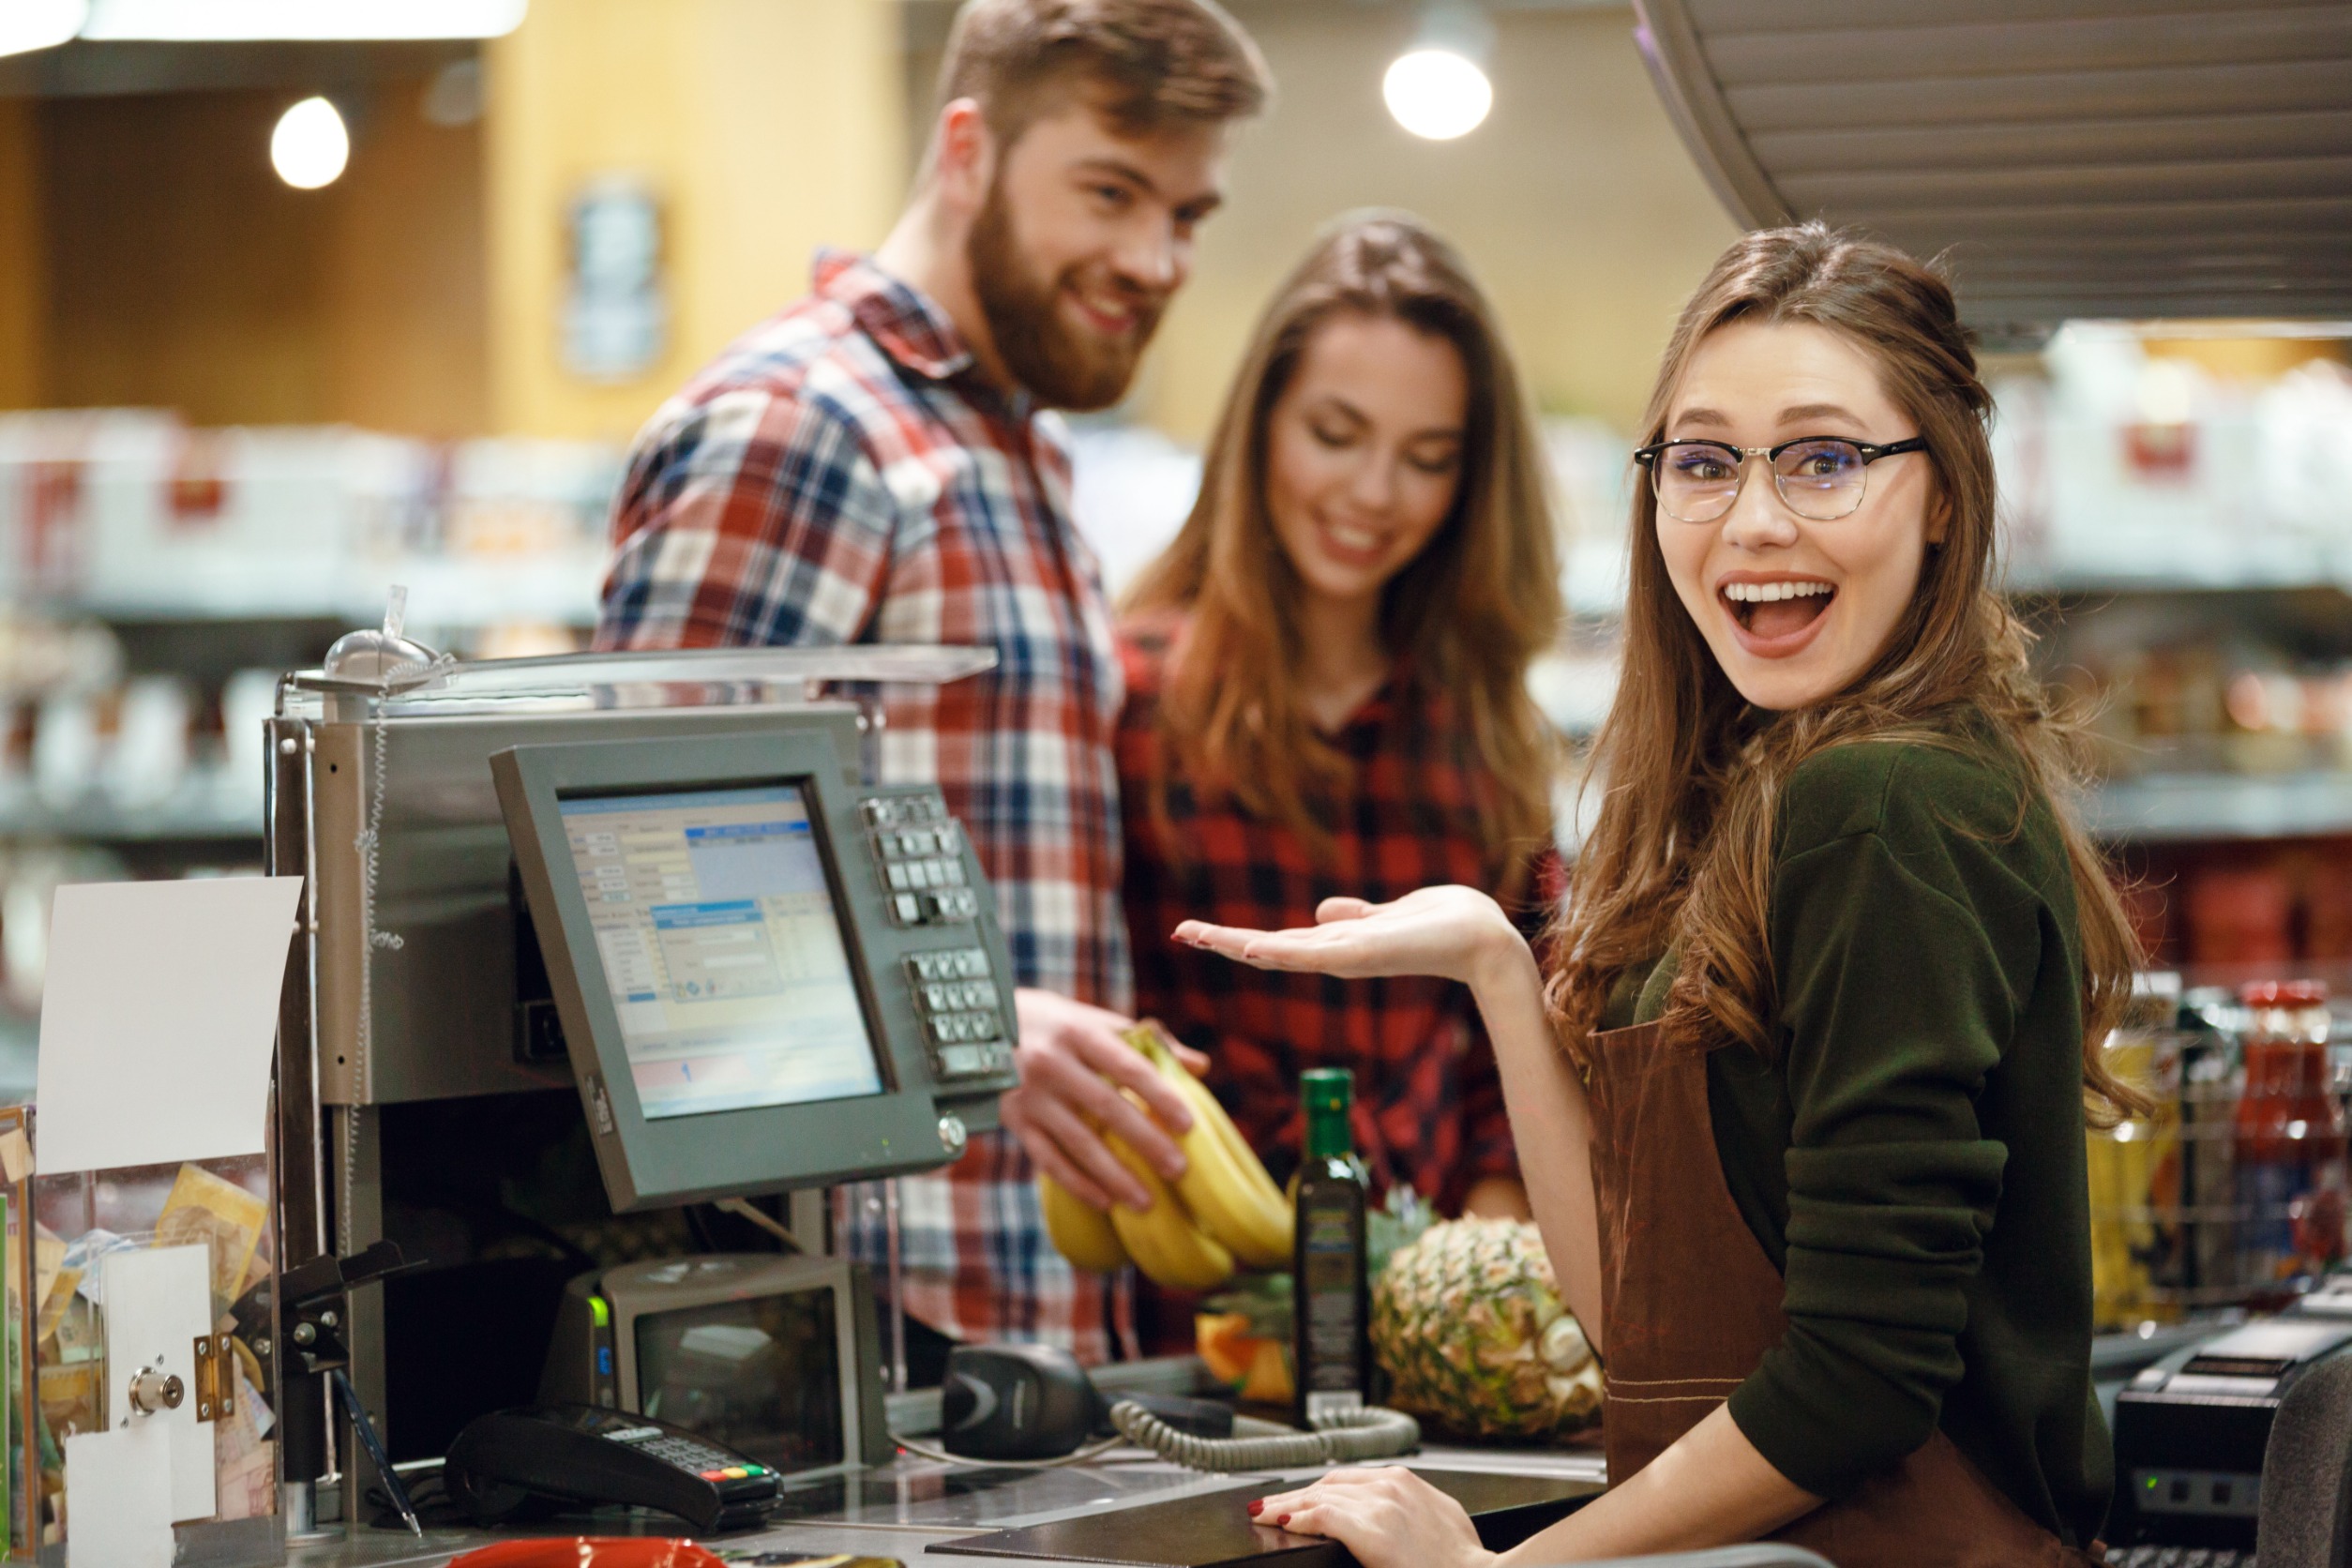 "I only interacted with the cashier briefly. Do they deserve a tip?" In situations where the service was minimal, such as a cashier simply ringing up your order, you might question whether tipping is necessary or appropriate. This thought reflects on your understanding of tipping norms in different service scenarios. :: 123rf